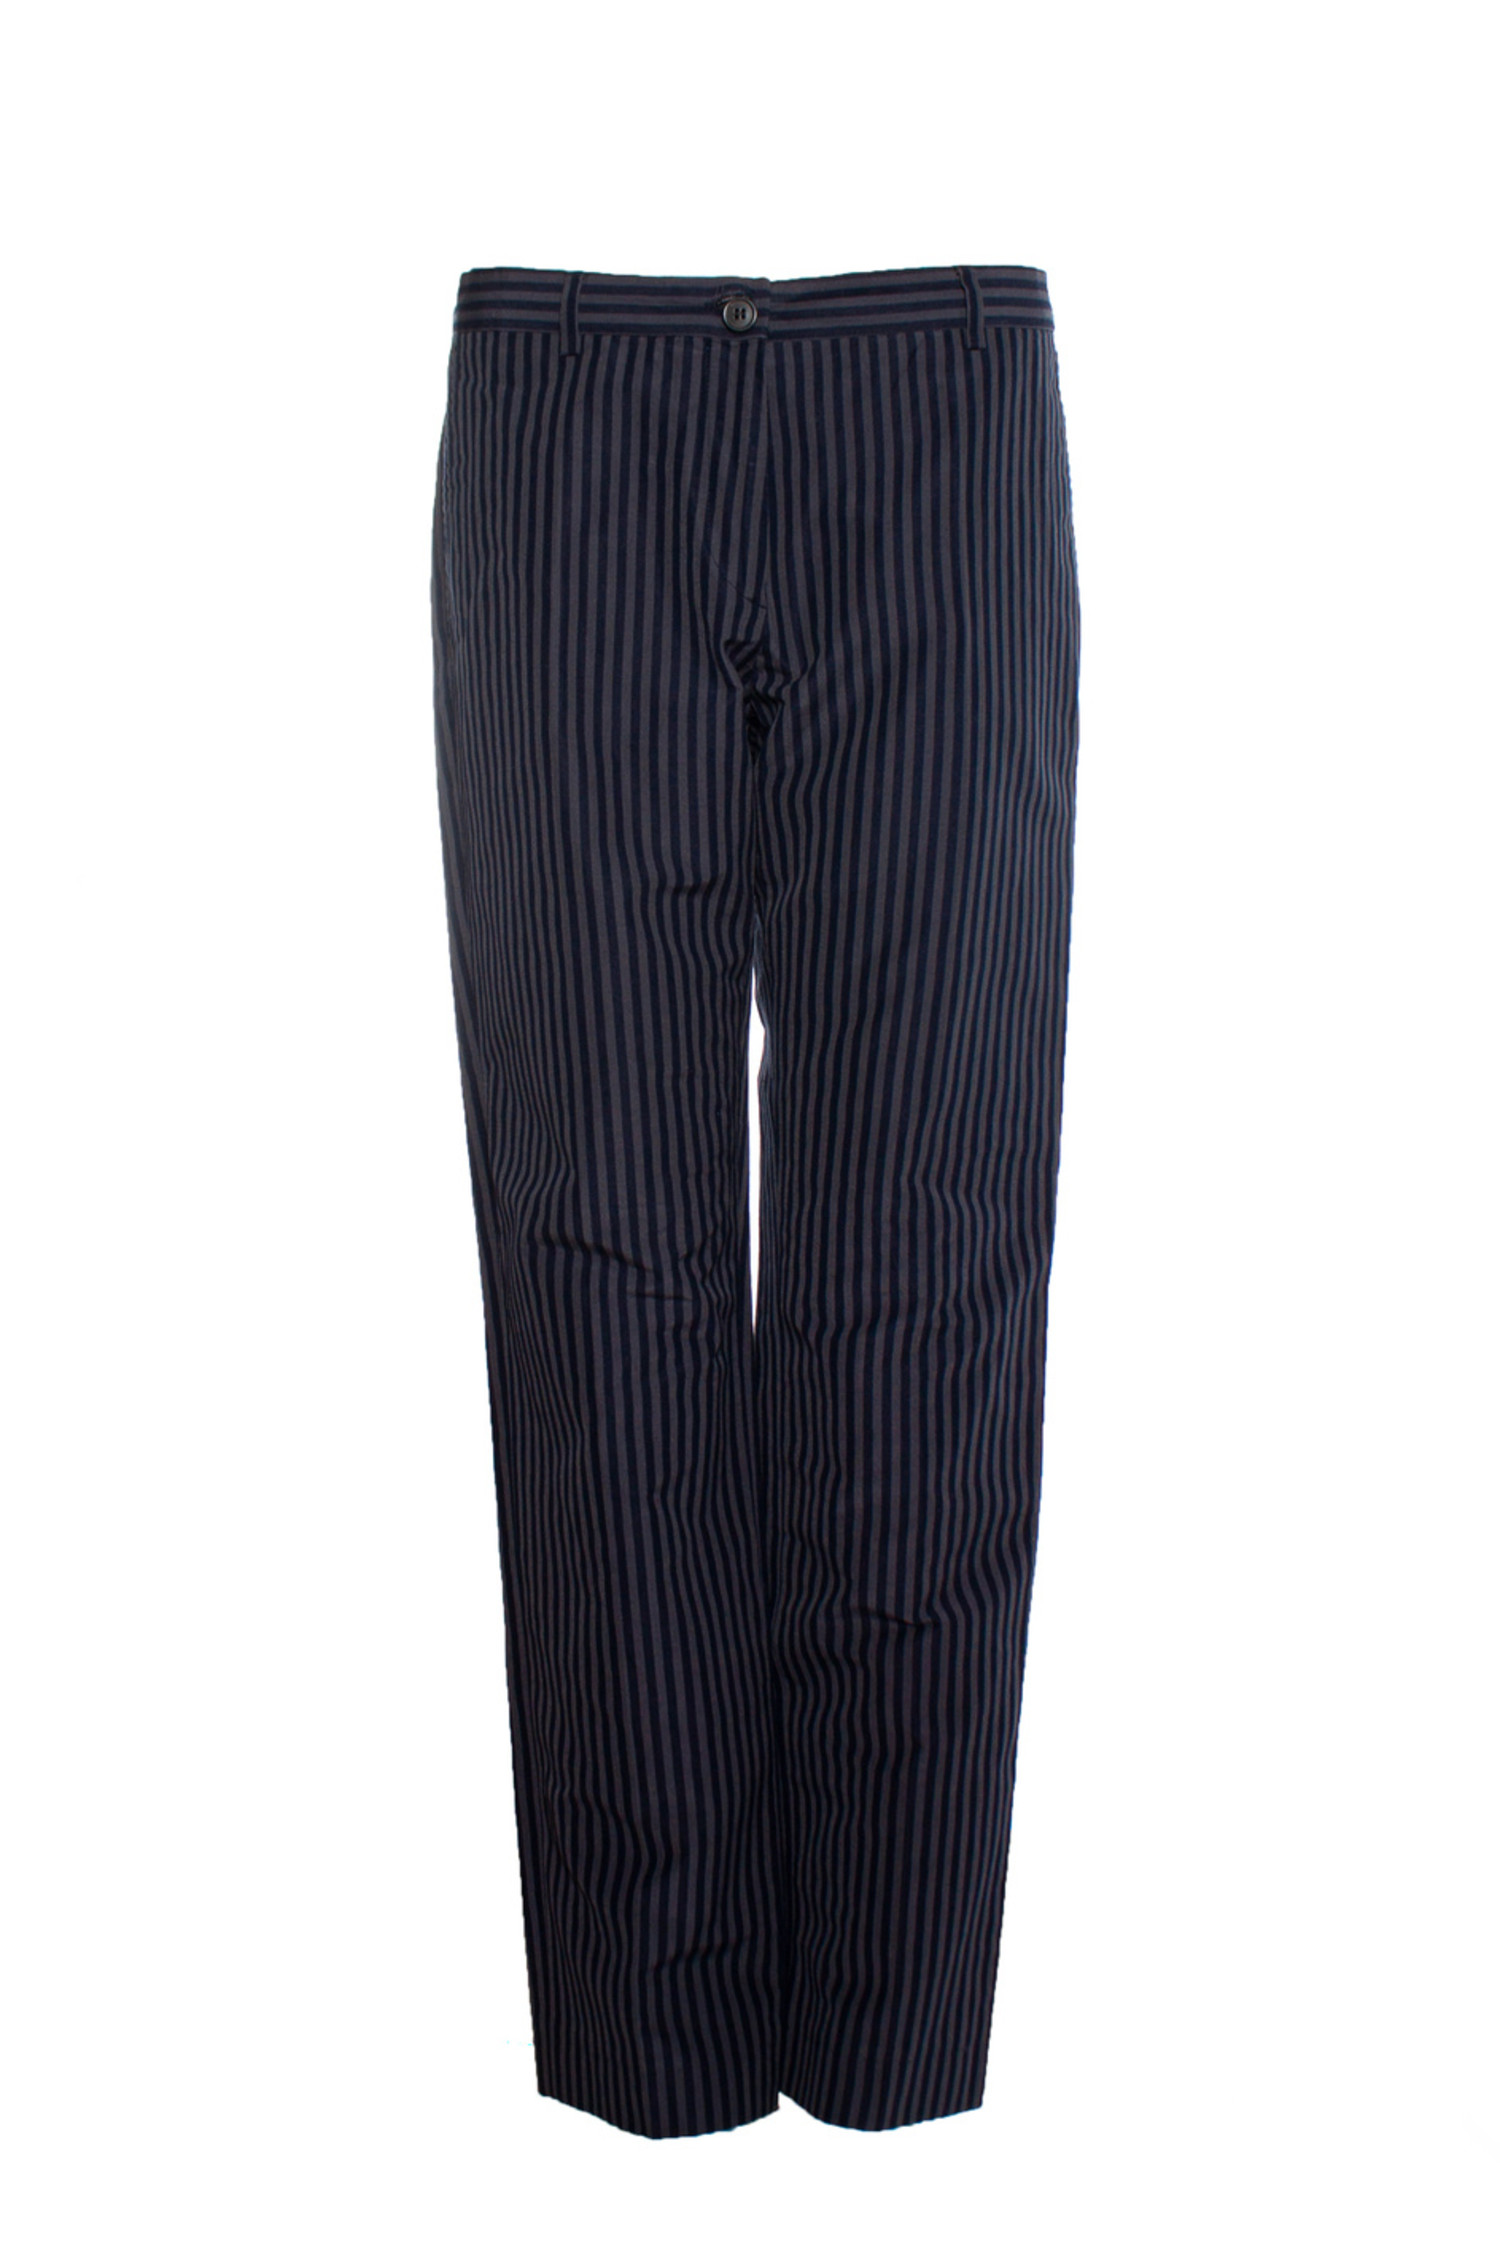 Black and white stripes chef trousers - Chef Trouser - Chef Uniforms -  HOSPITALITY